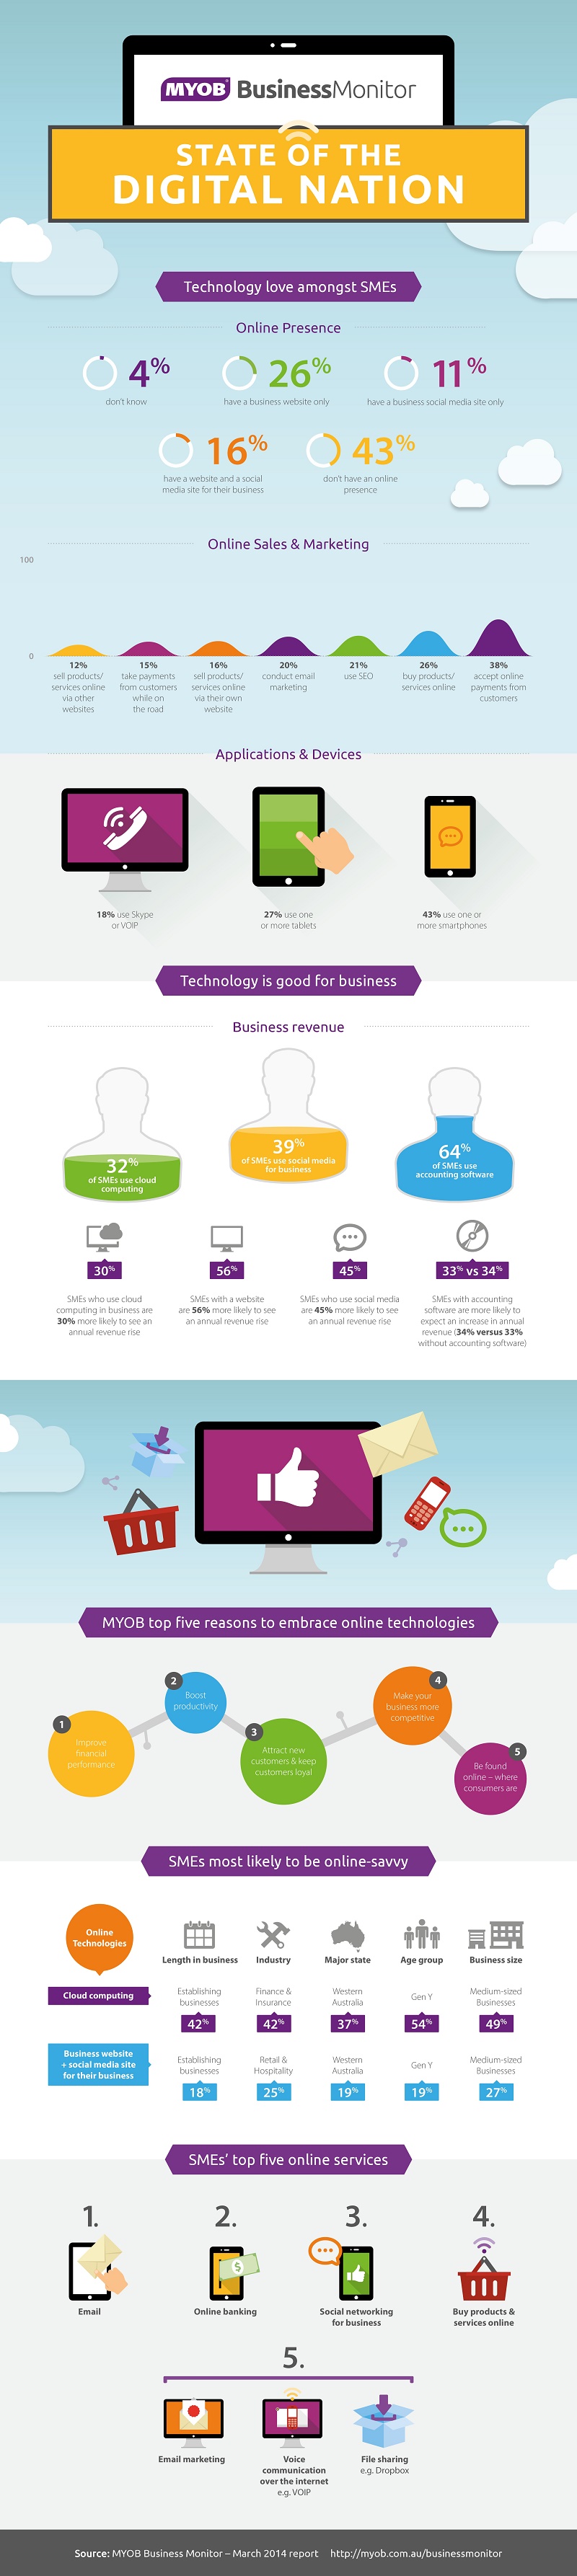 MYOB Business Monitor Digital Nation Infographic-page-